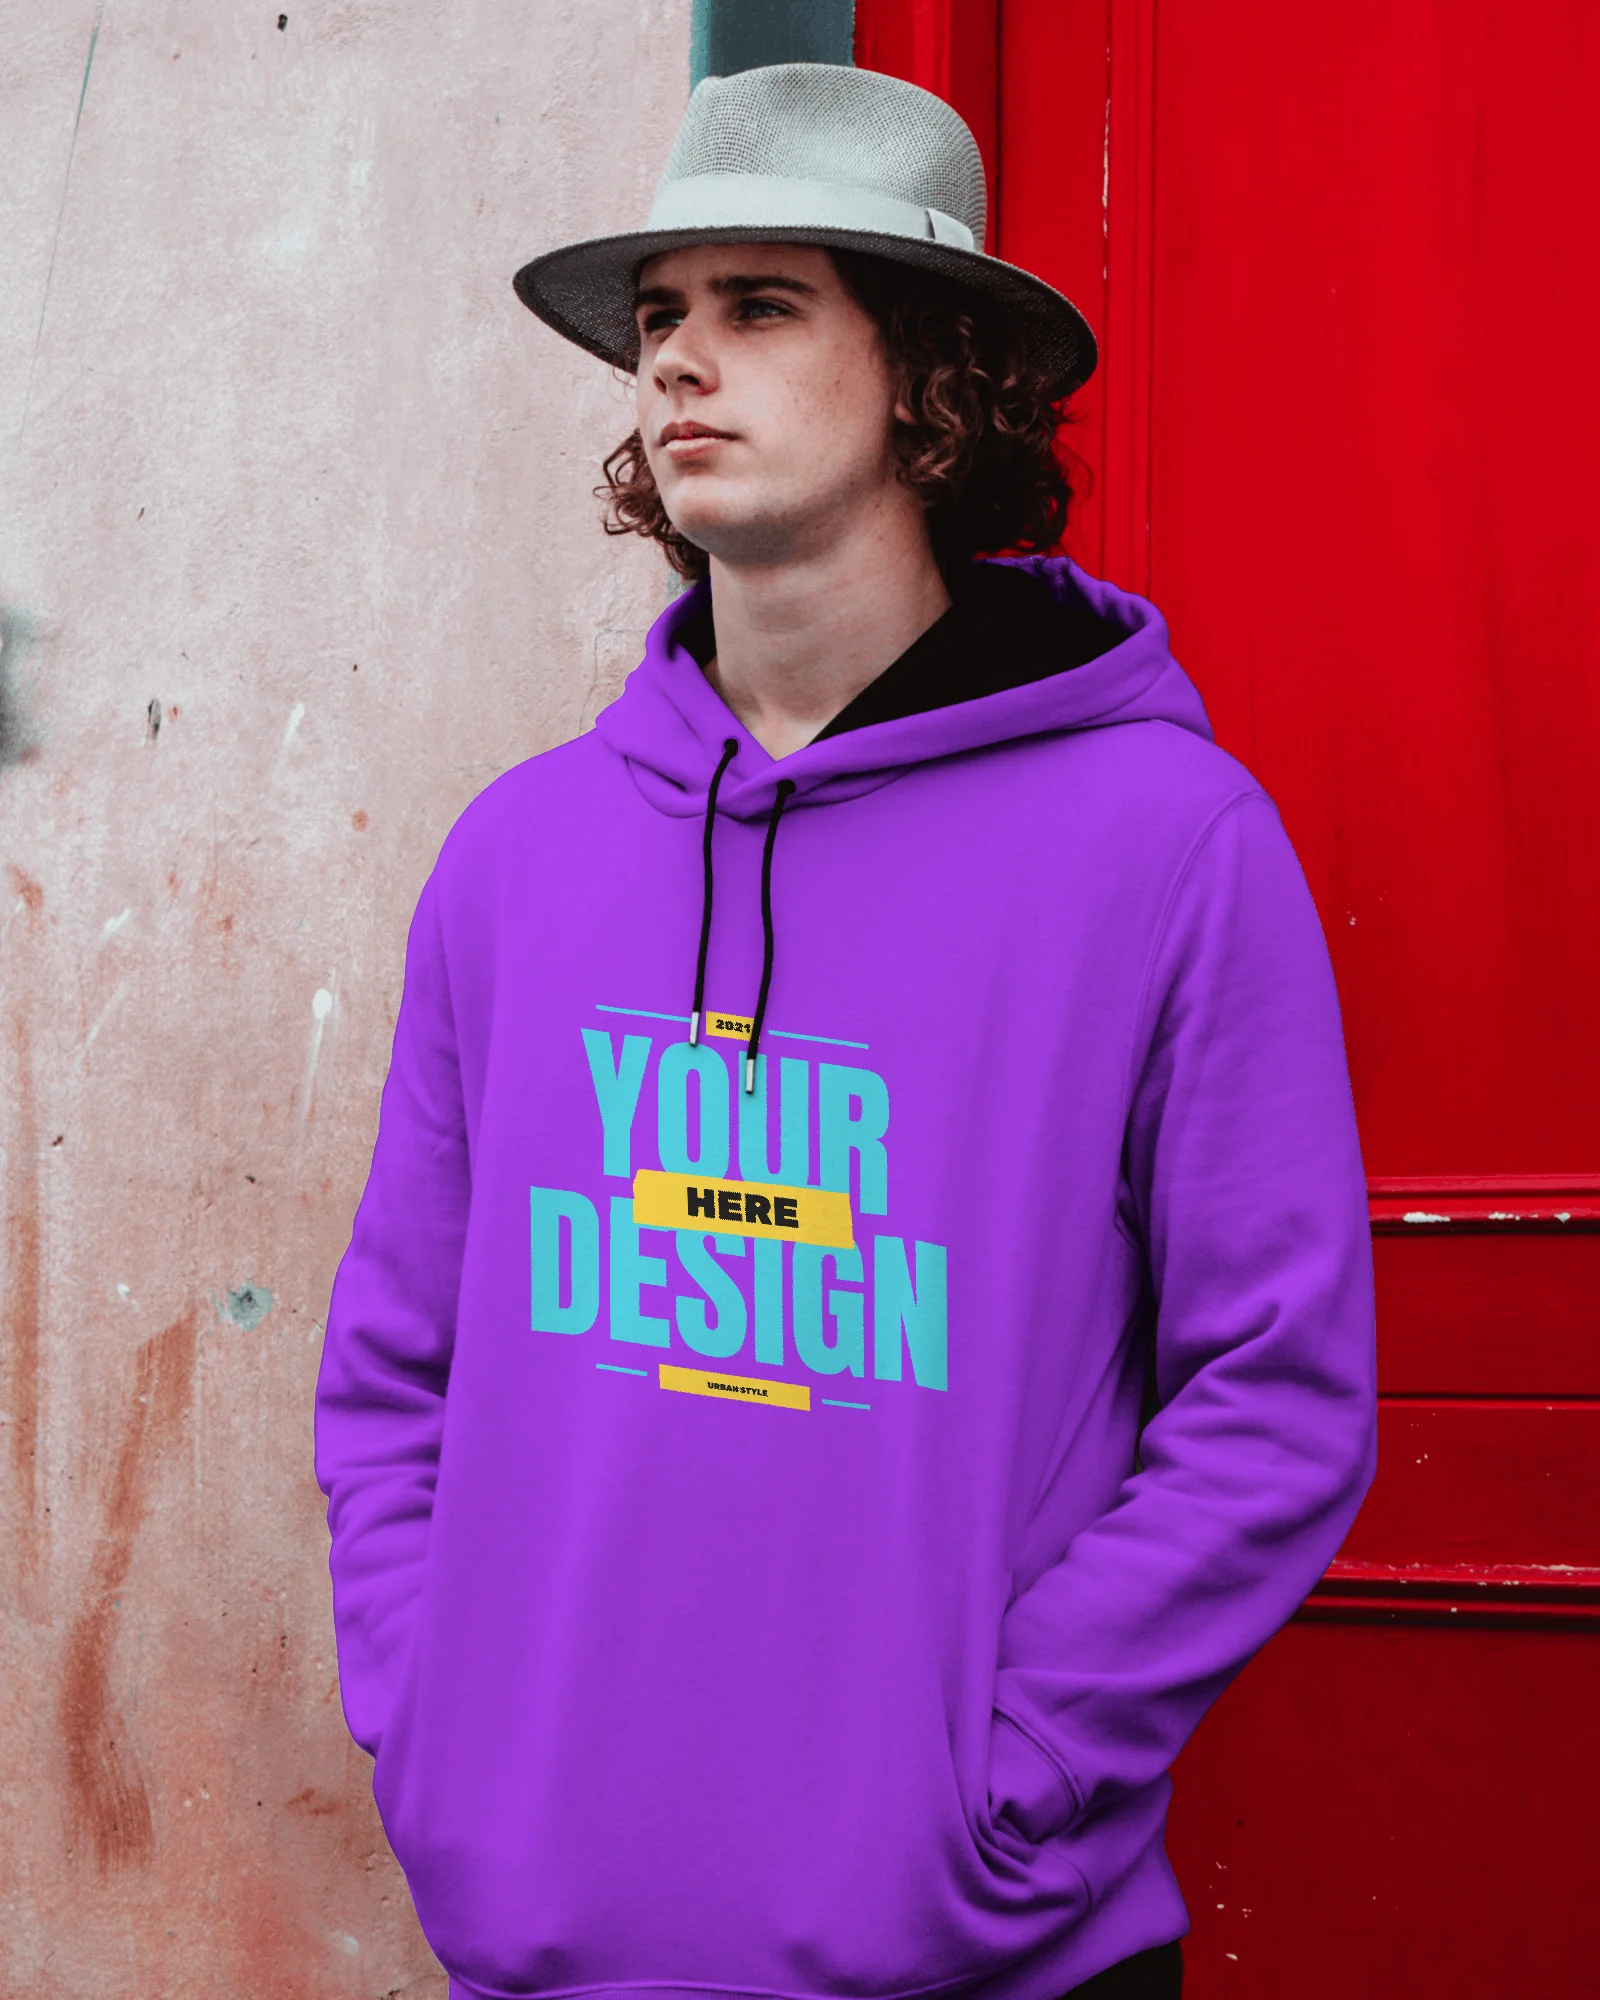 A man wearing a purple hoodie Mockup and standing outside the door